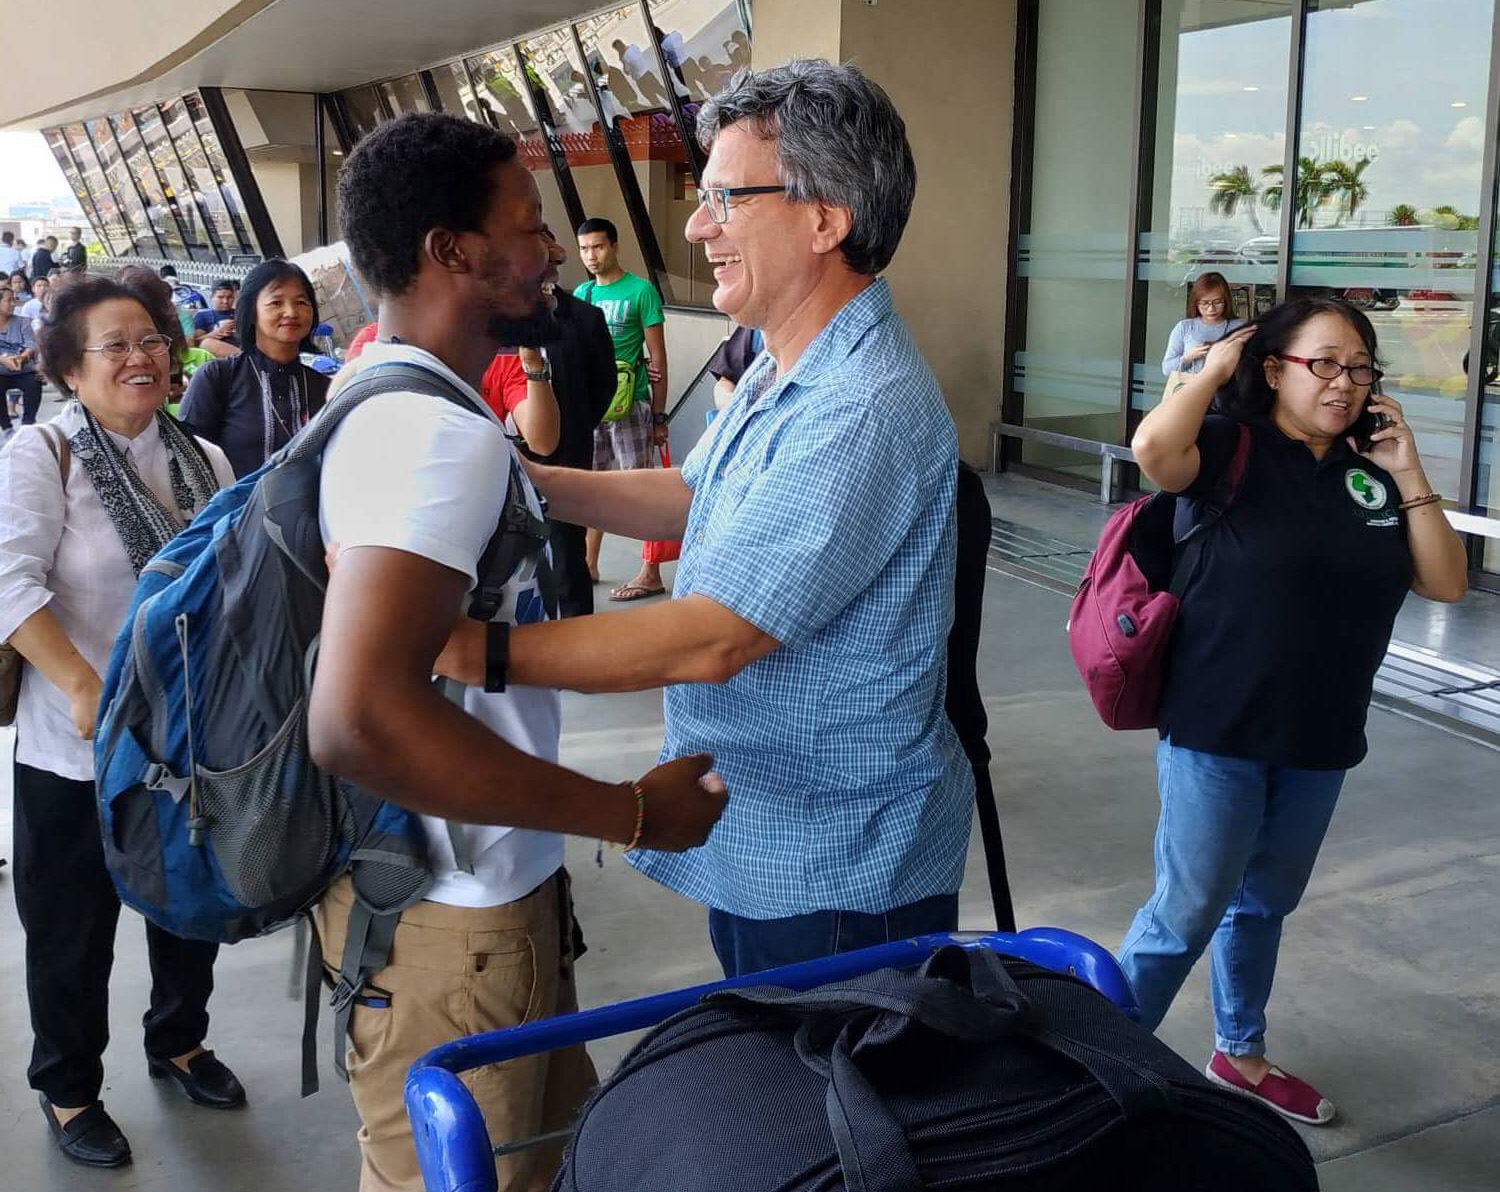 United Methodist missionary Tawanda Chandiwana (left foreground) is embraced by Thomas Kemper, head of the denomination’s Board of Global Ministries, at the Ninoy Aquino International Airport in Manila, Philippines, after Chandiwana was released from a detention center and allowed to leave the country. Photo by Mendoza Adrian.